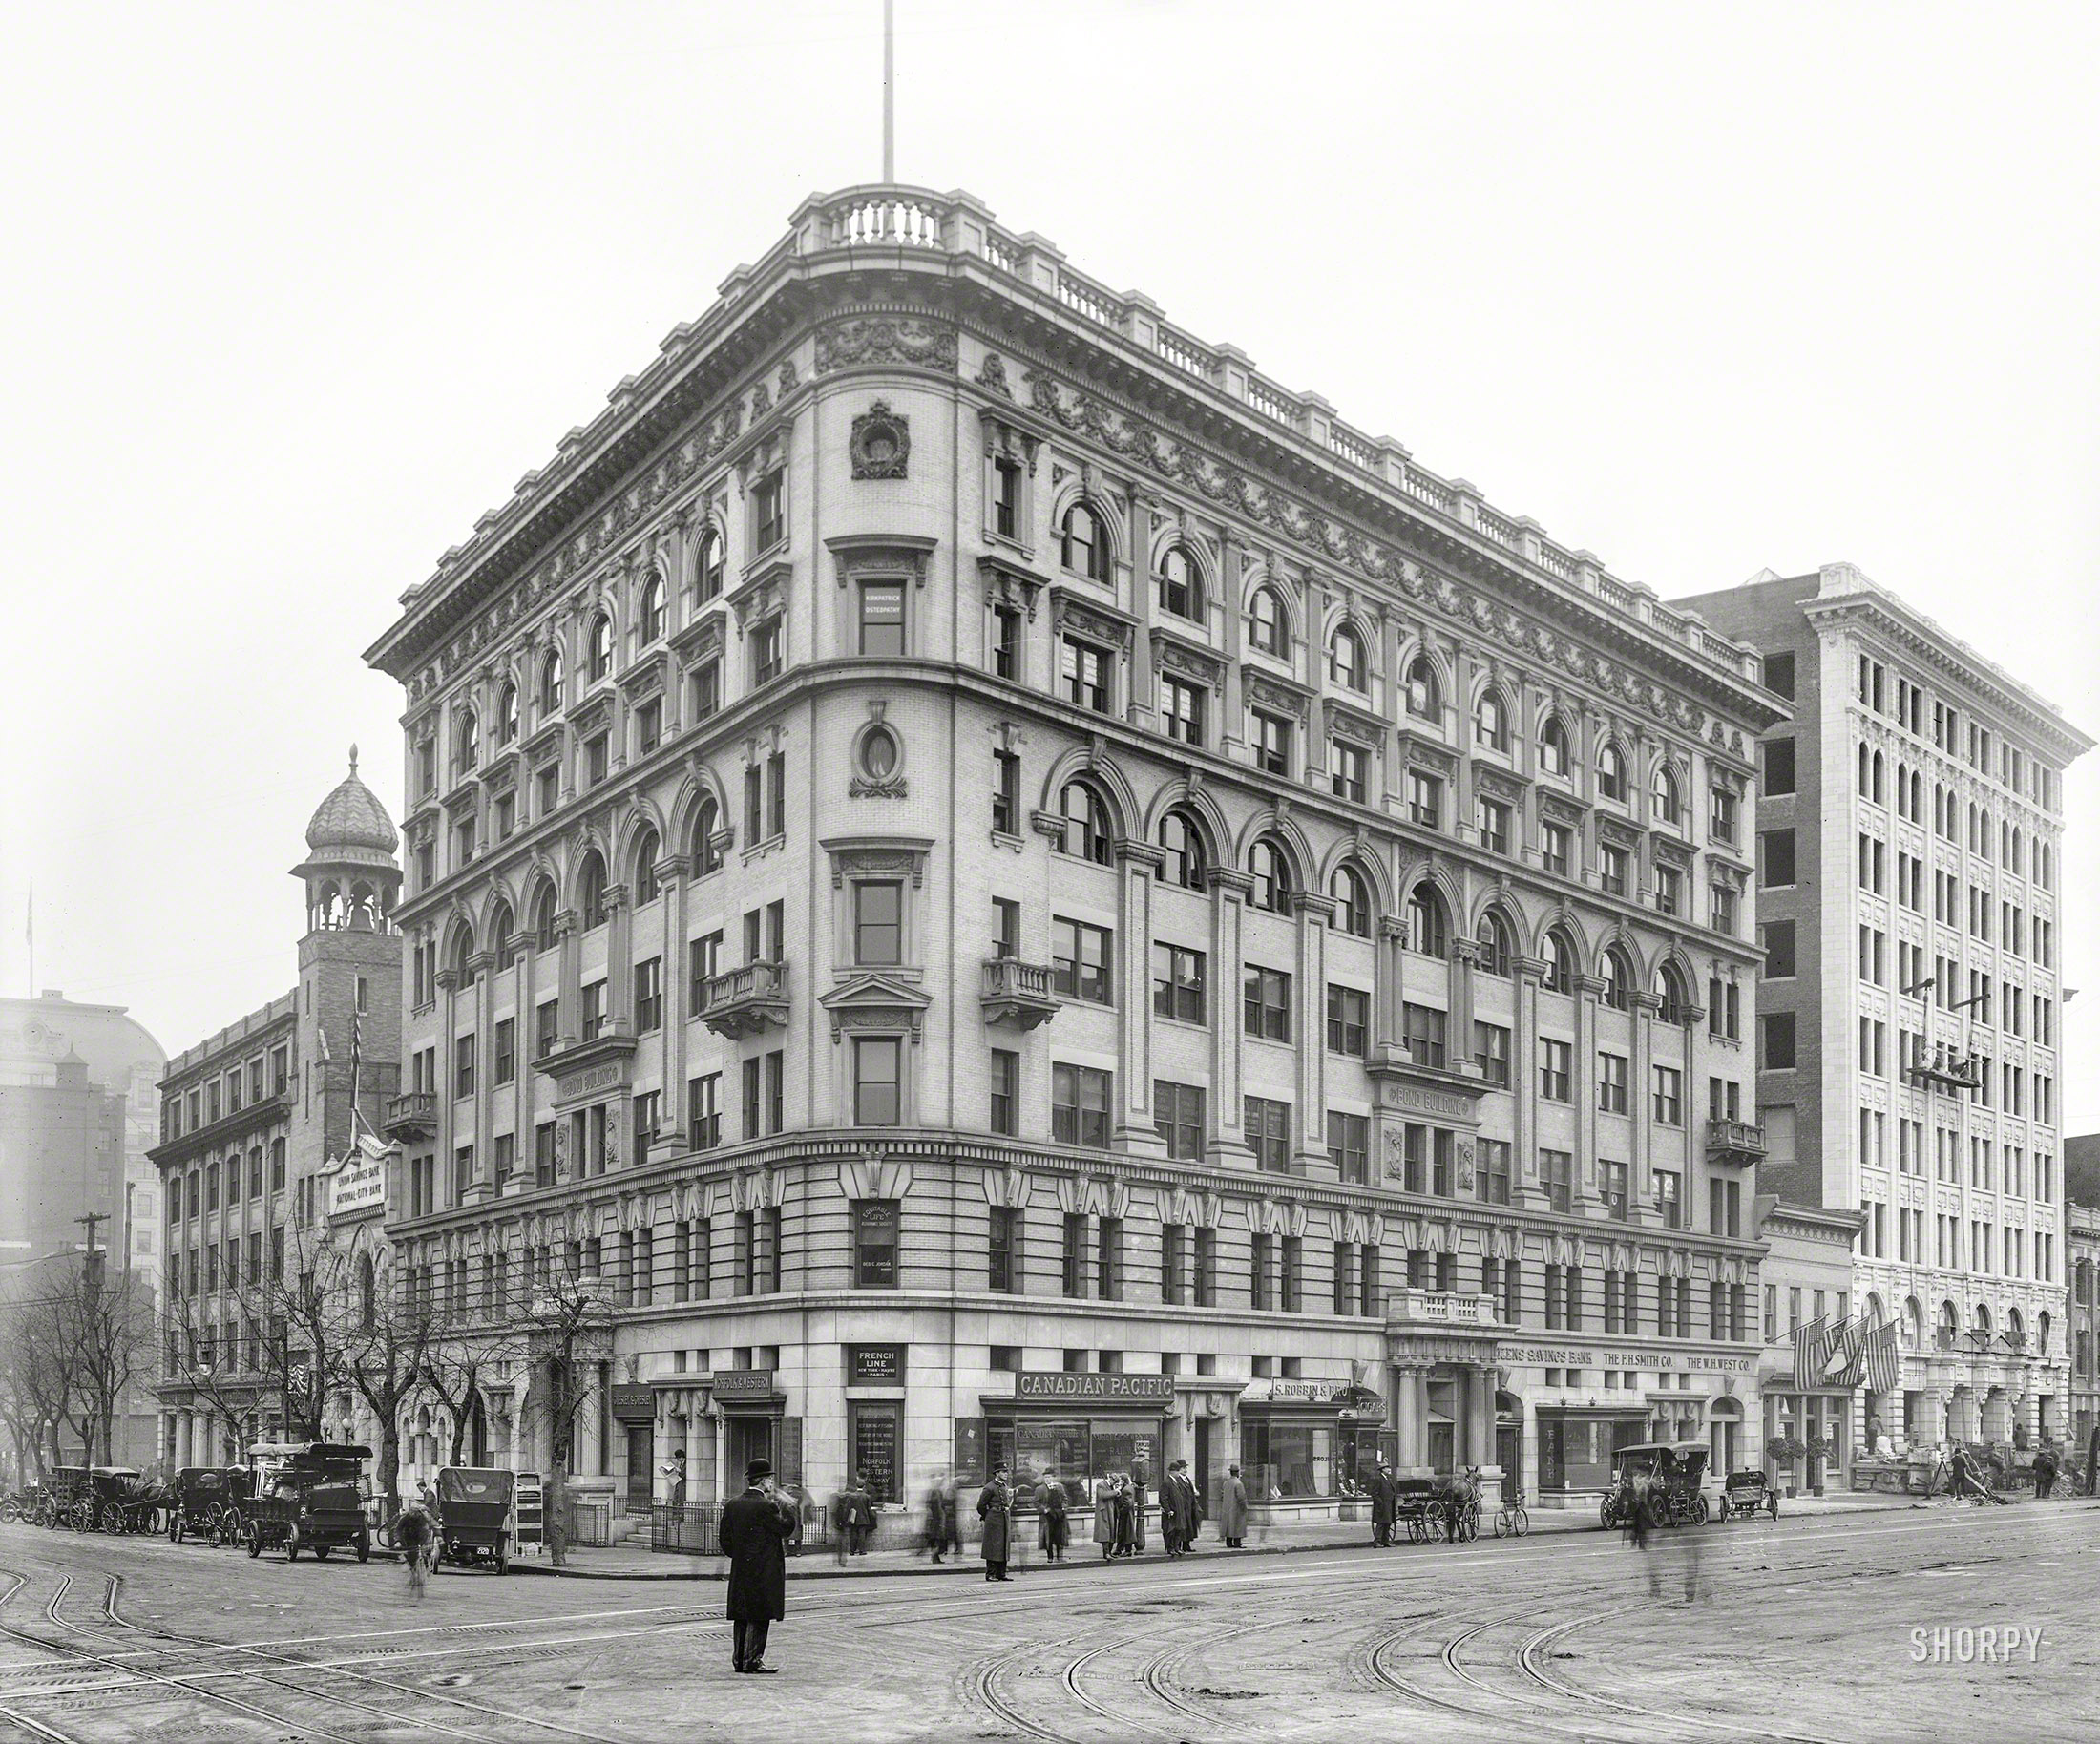 Washington, D.C., circa 1907. "Bond Building, Fourteenth Street and New York Avenue N.W." 8x10 inch glass negative, National Photo Company Collection. View full size.